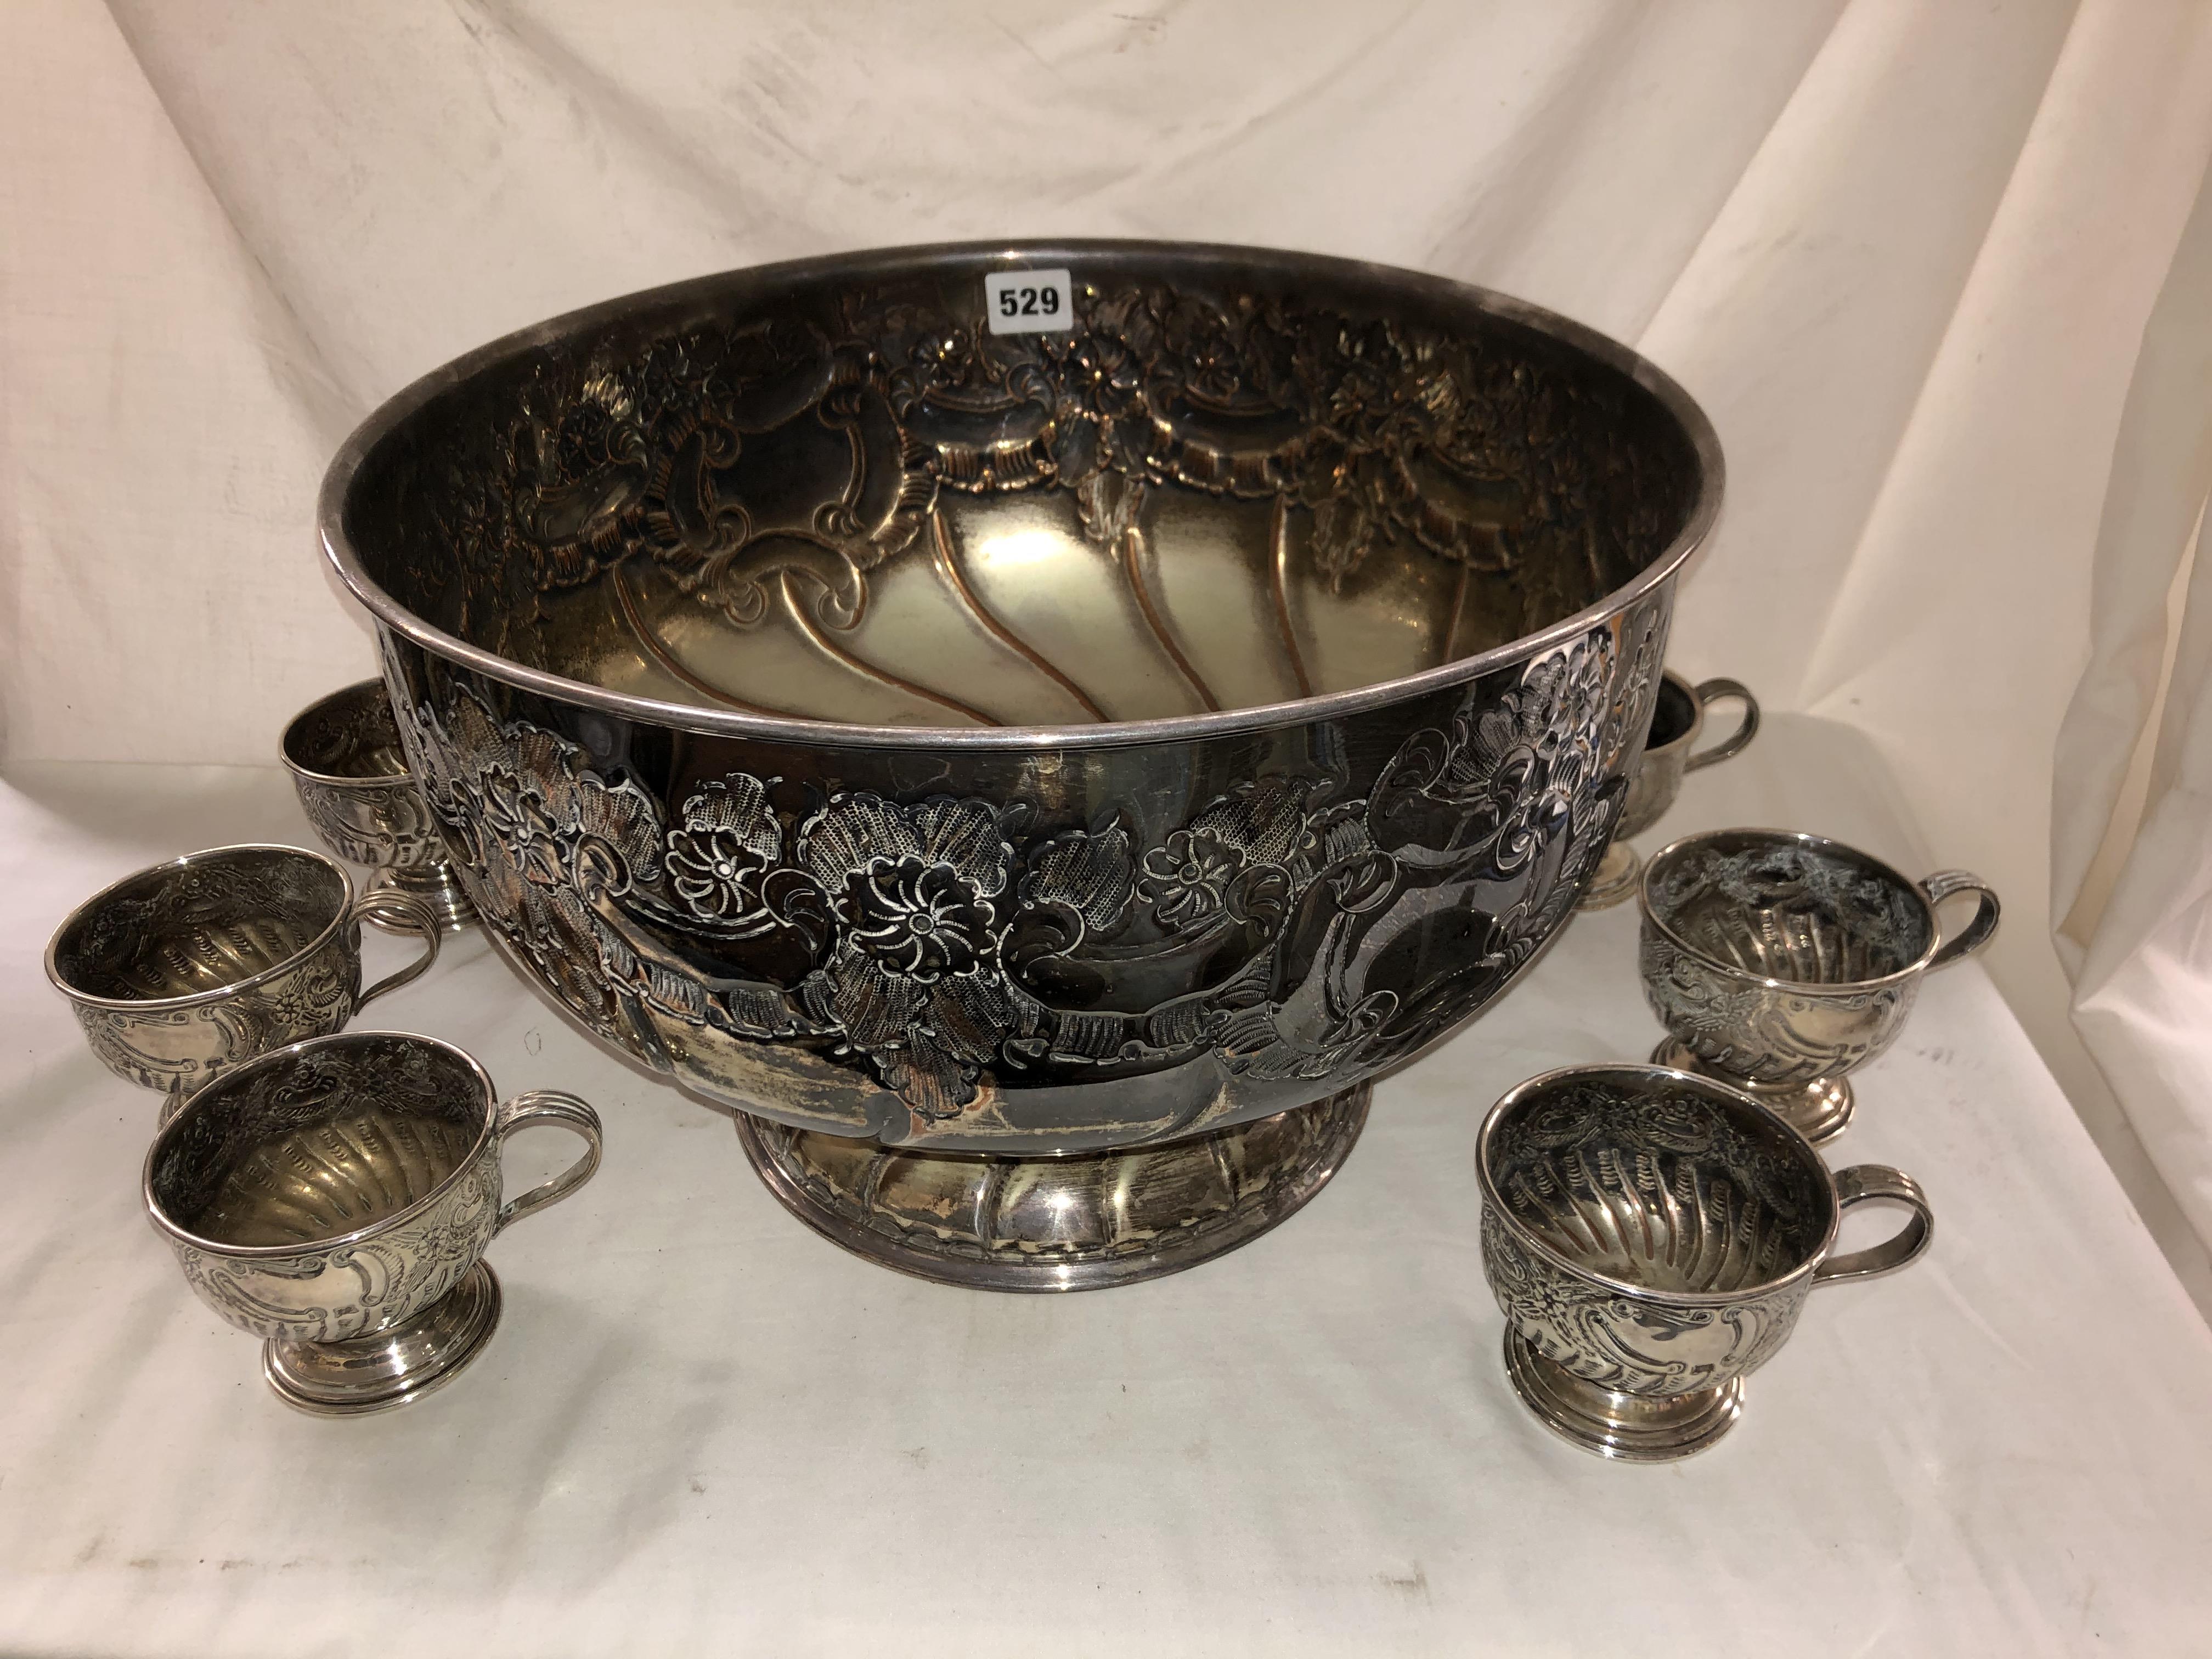 VINERS OF SHEFFIELD ALPHA PLATED REPOUSSEE PUNCHBOWL AND SIX BOWLS